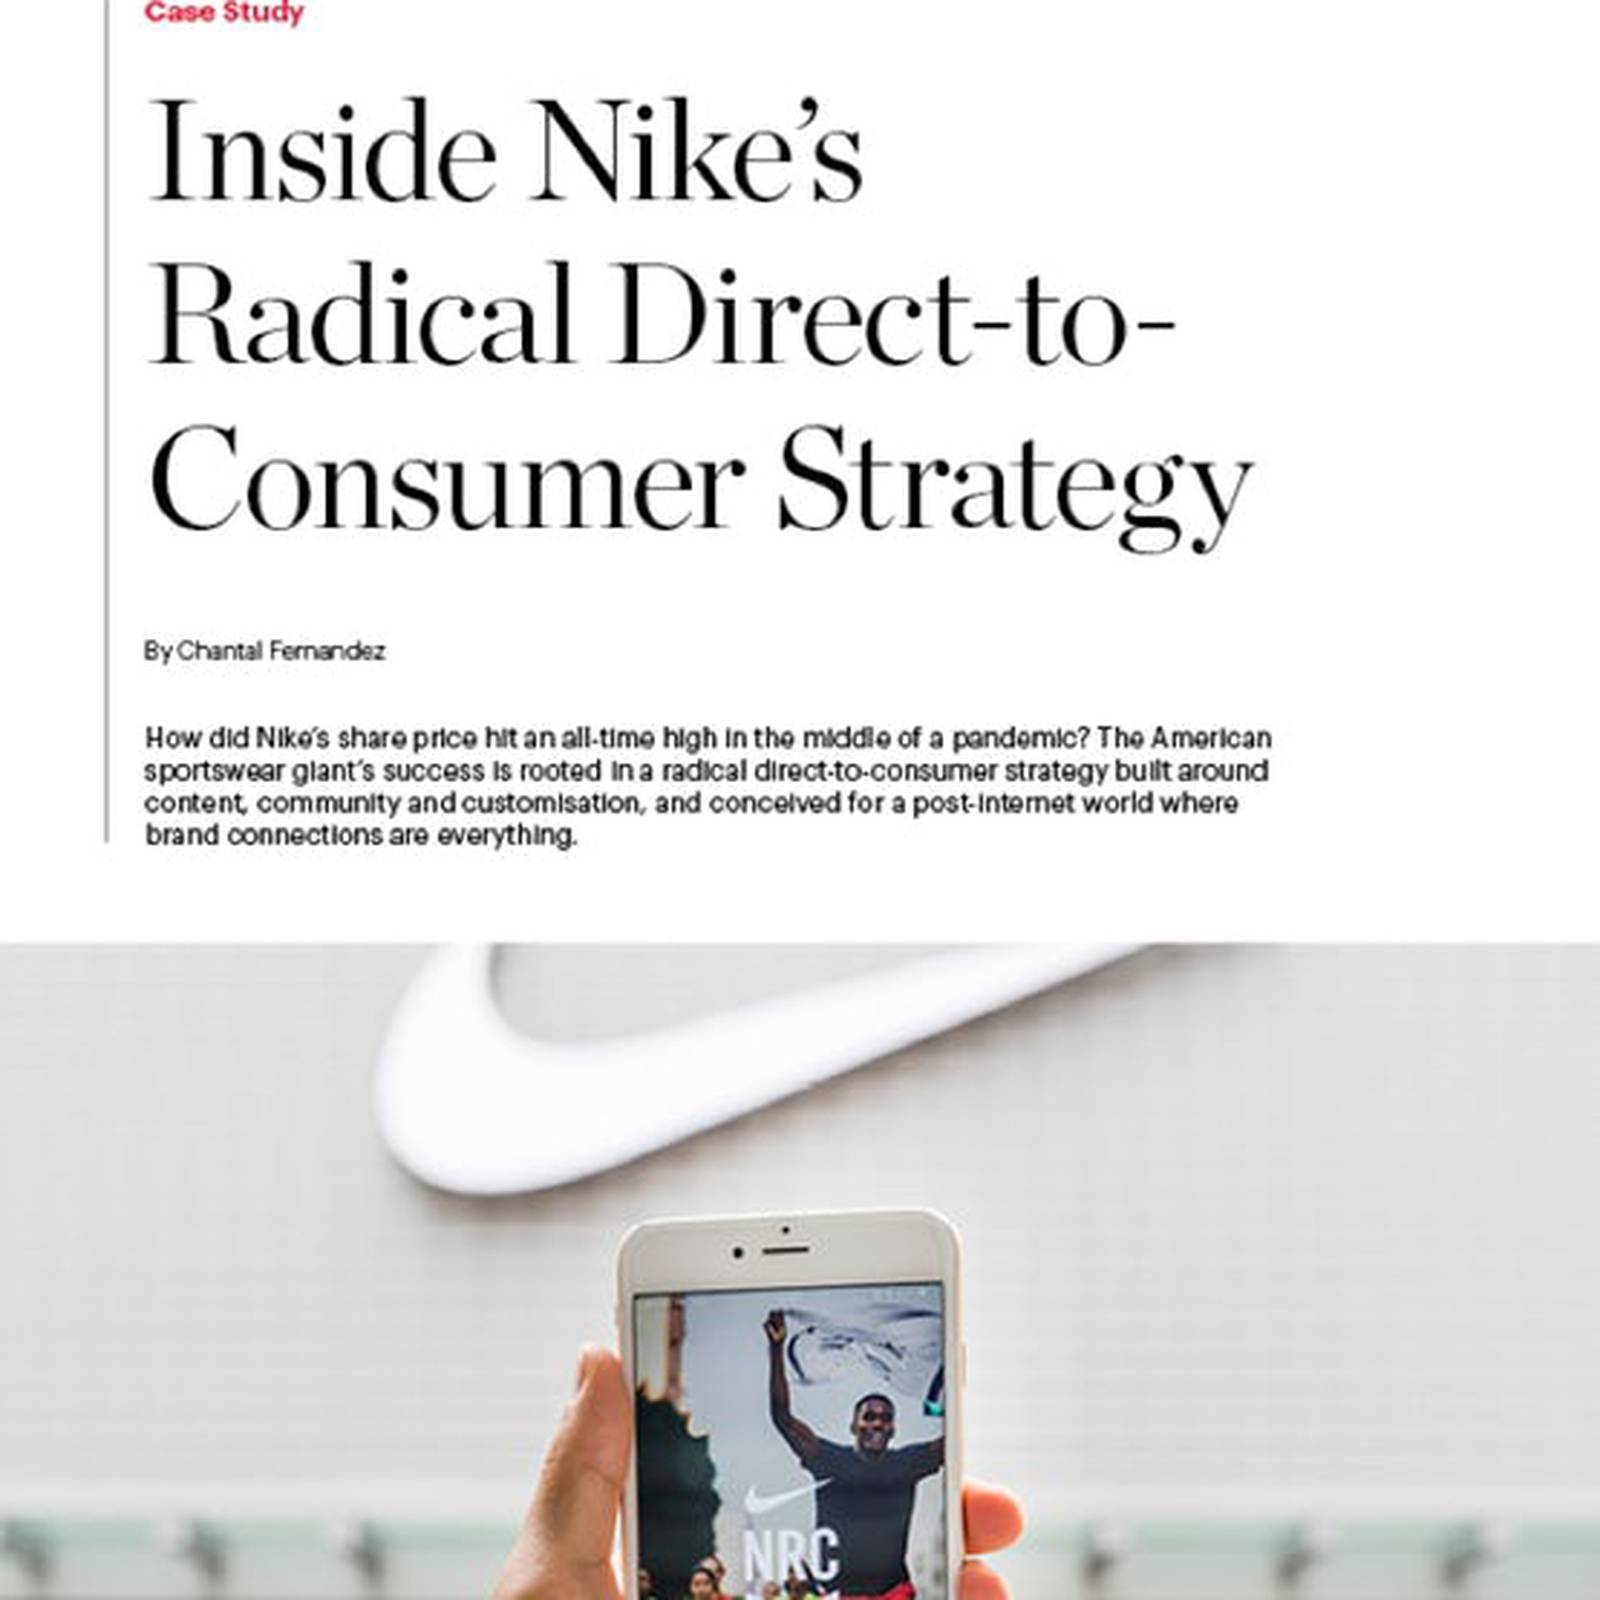 nike case study harvard business review